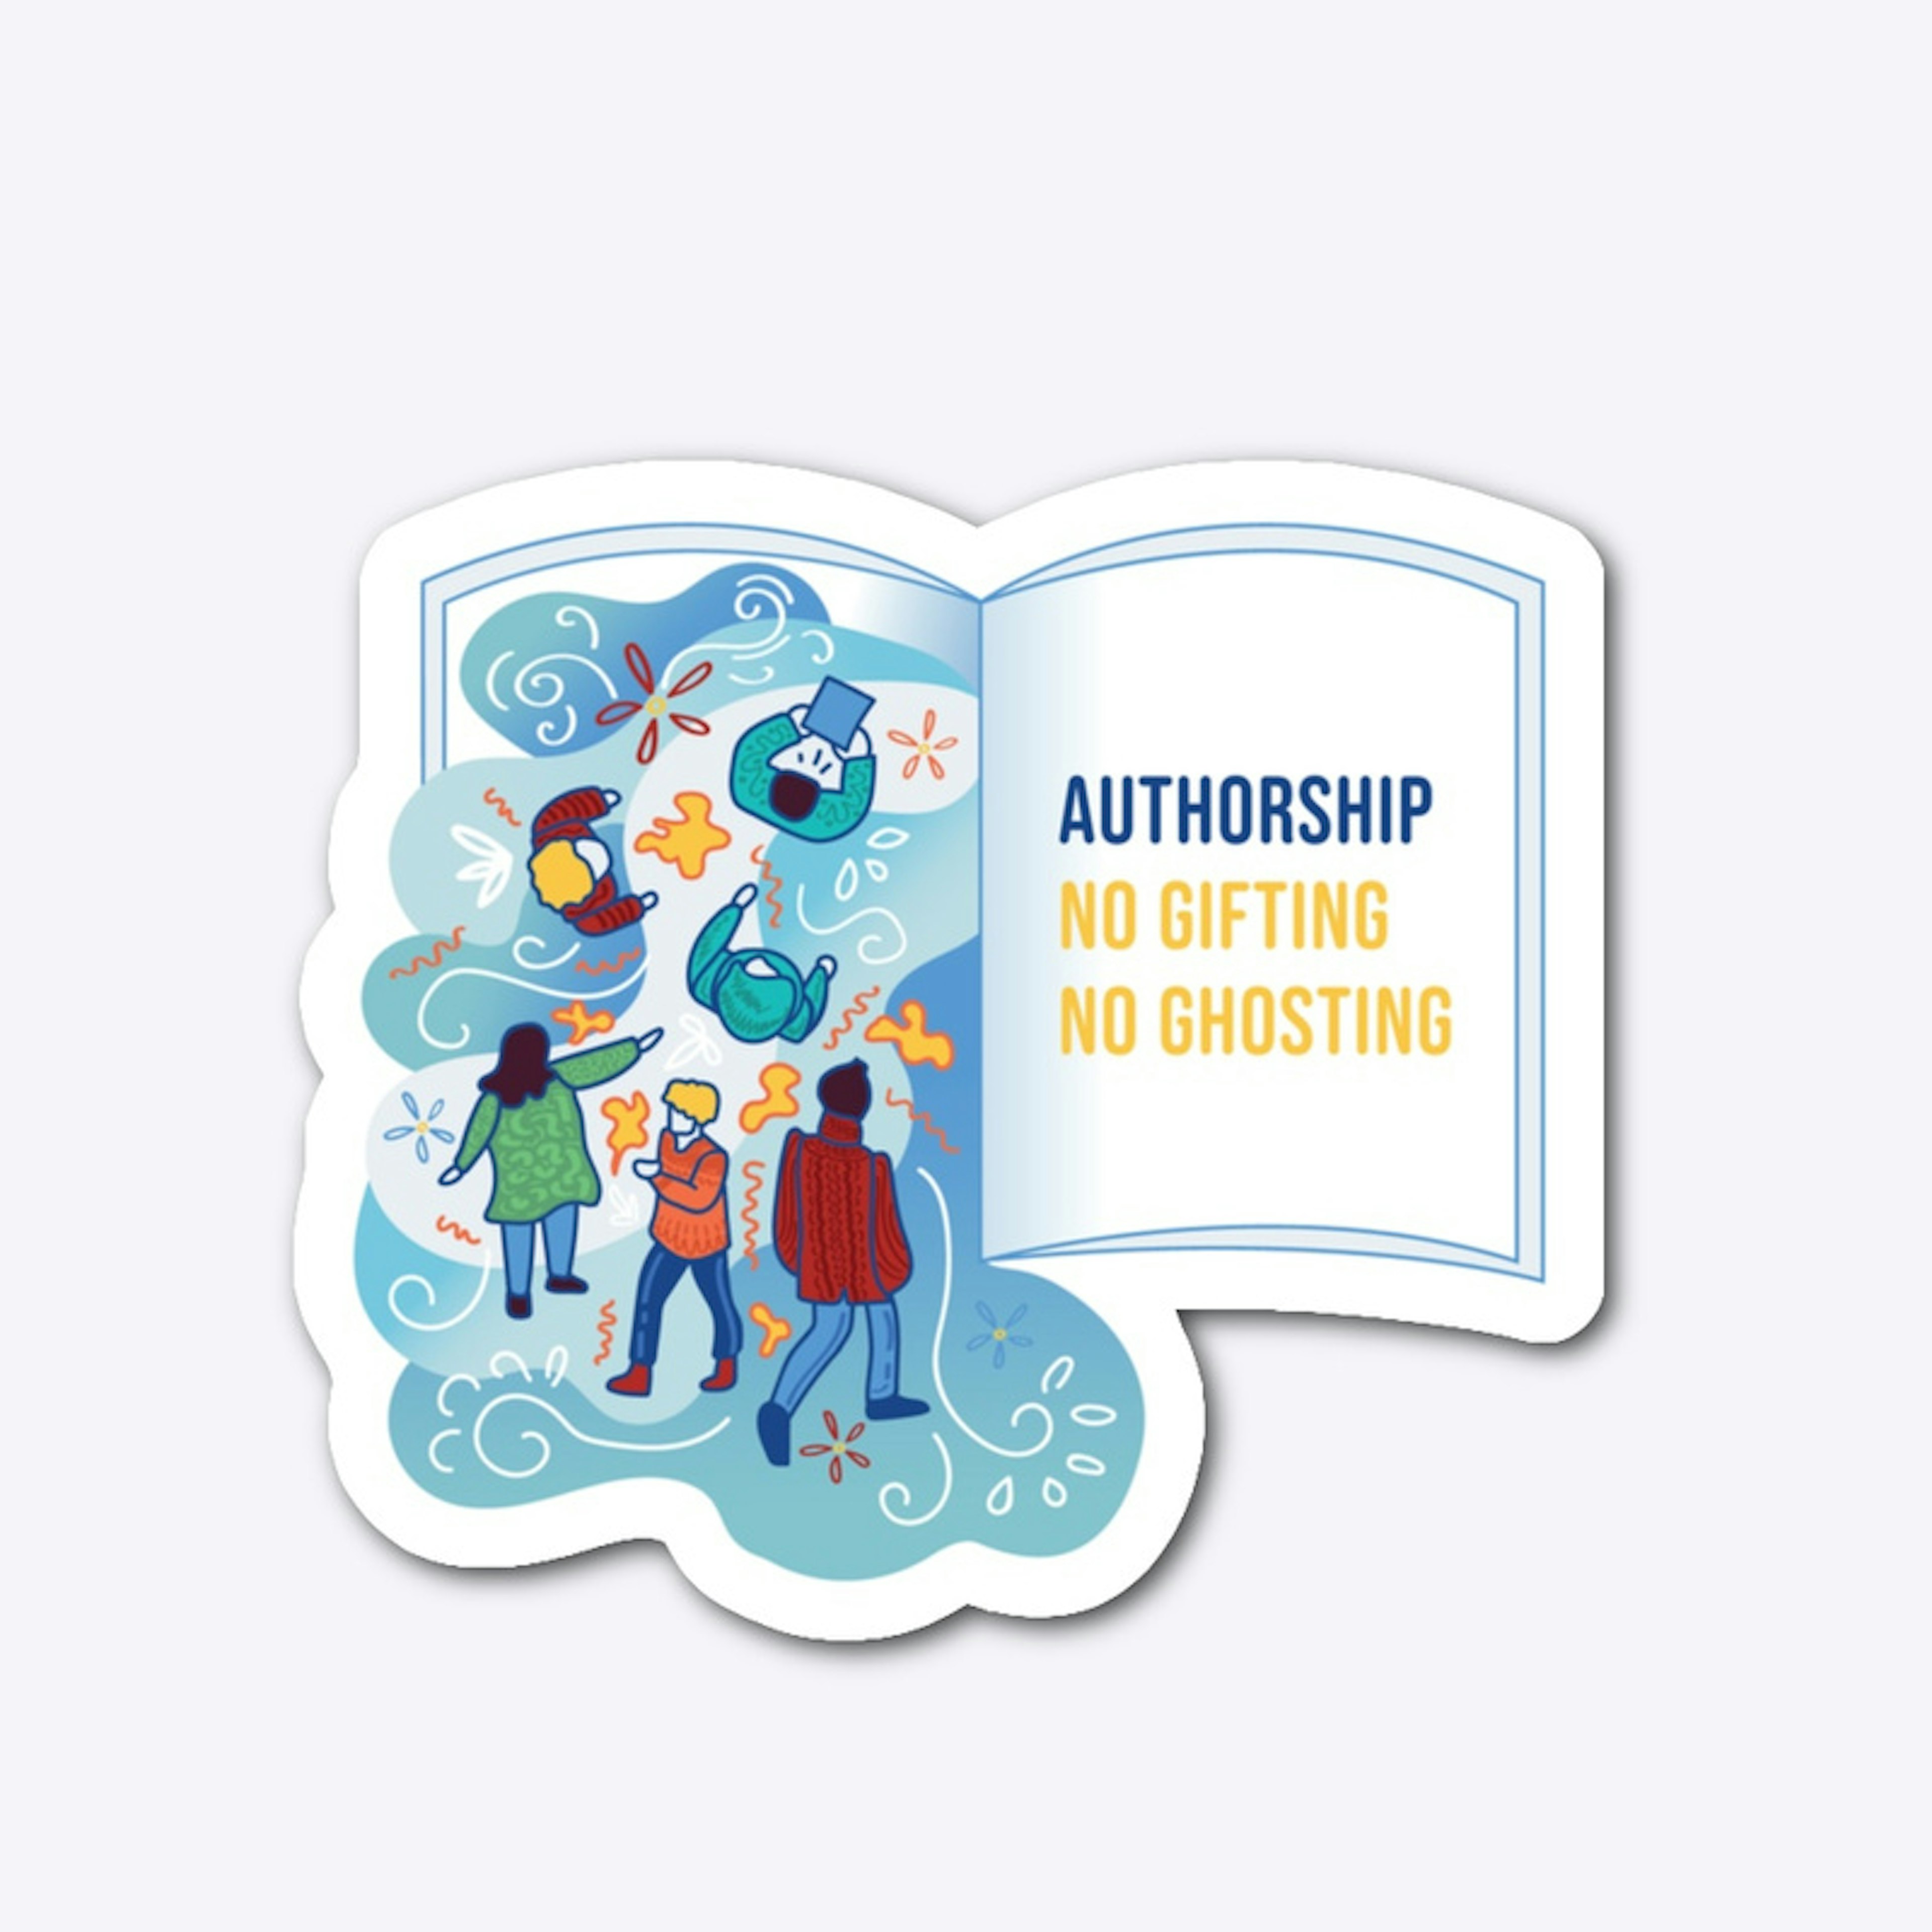 Group authorship with book